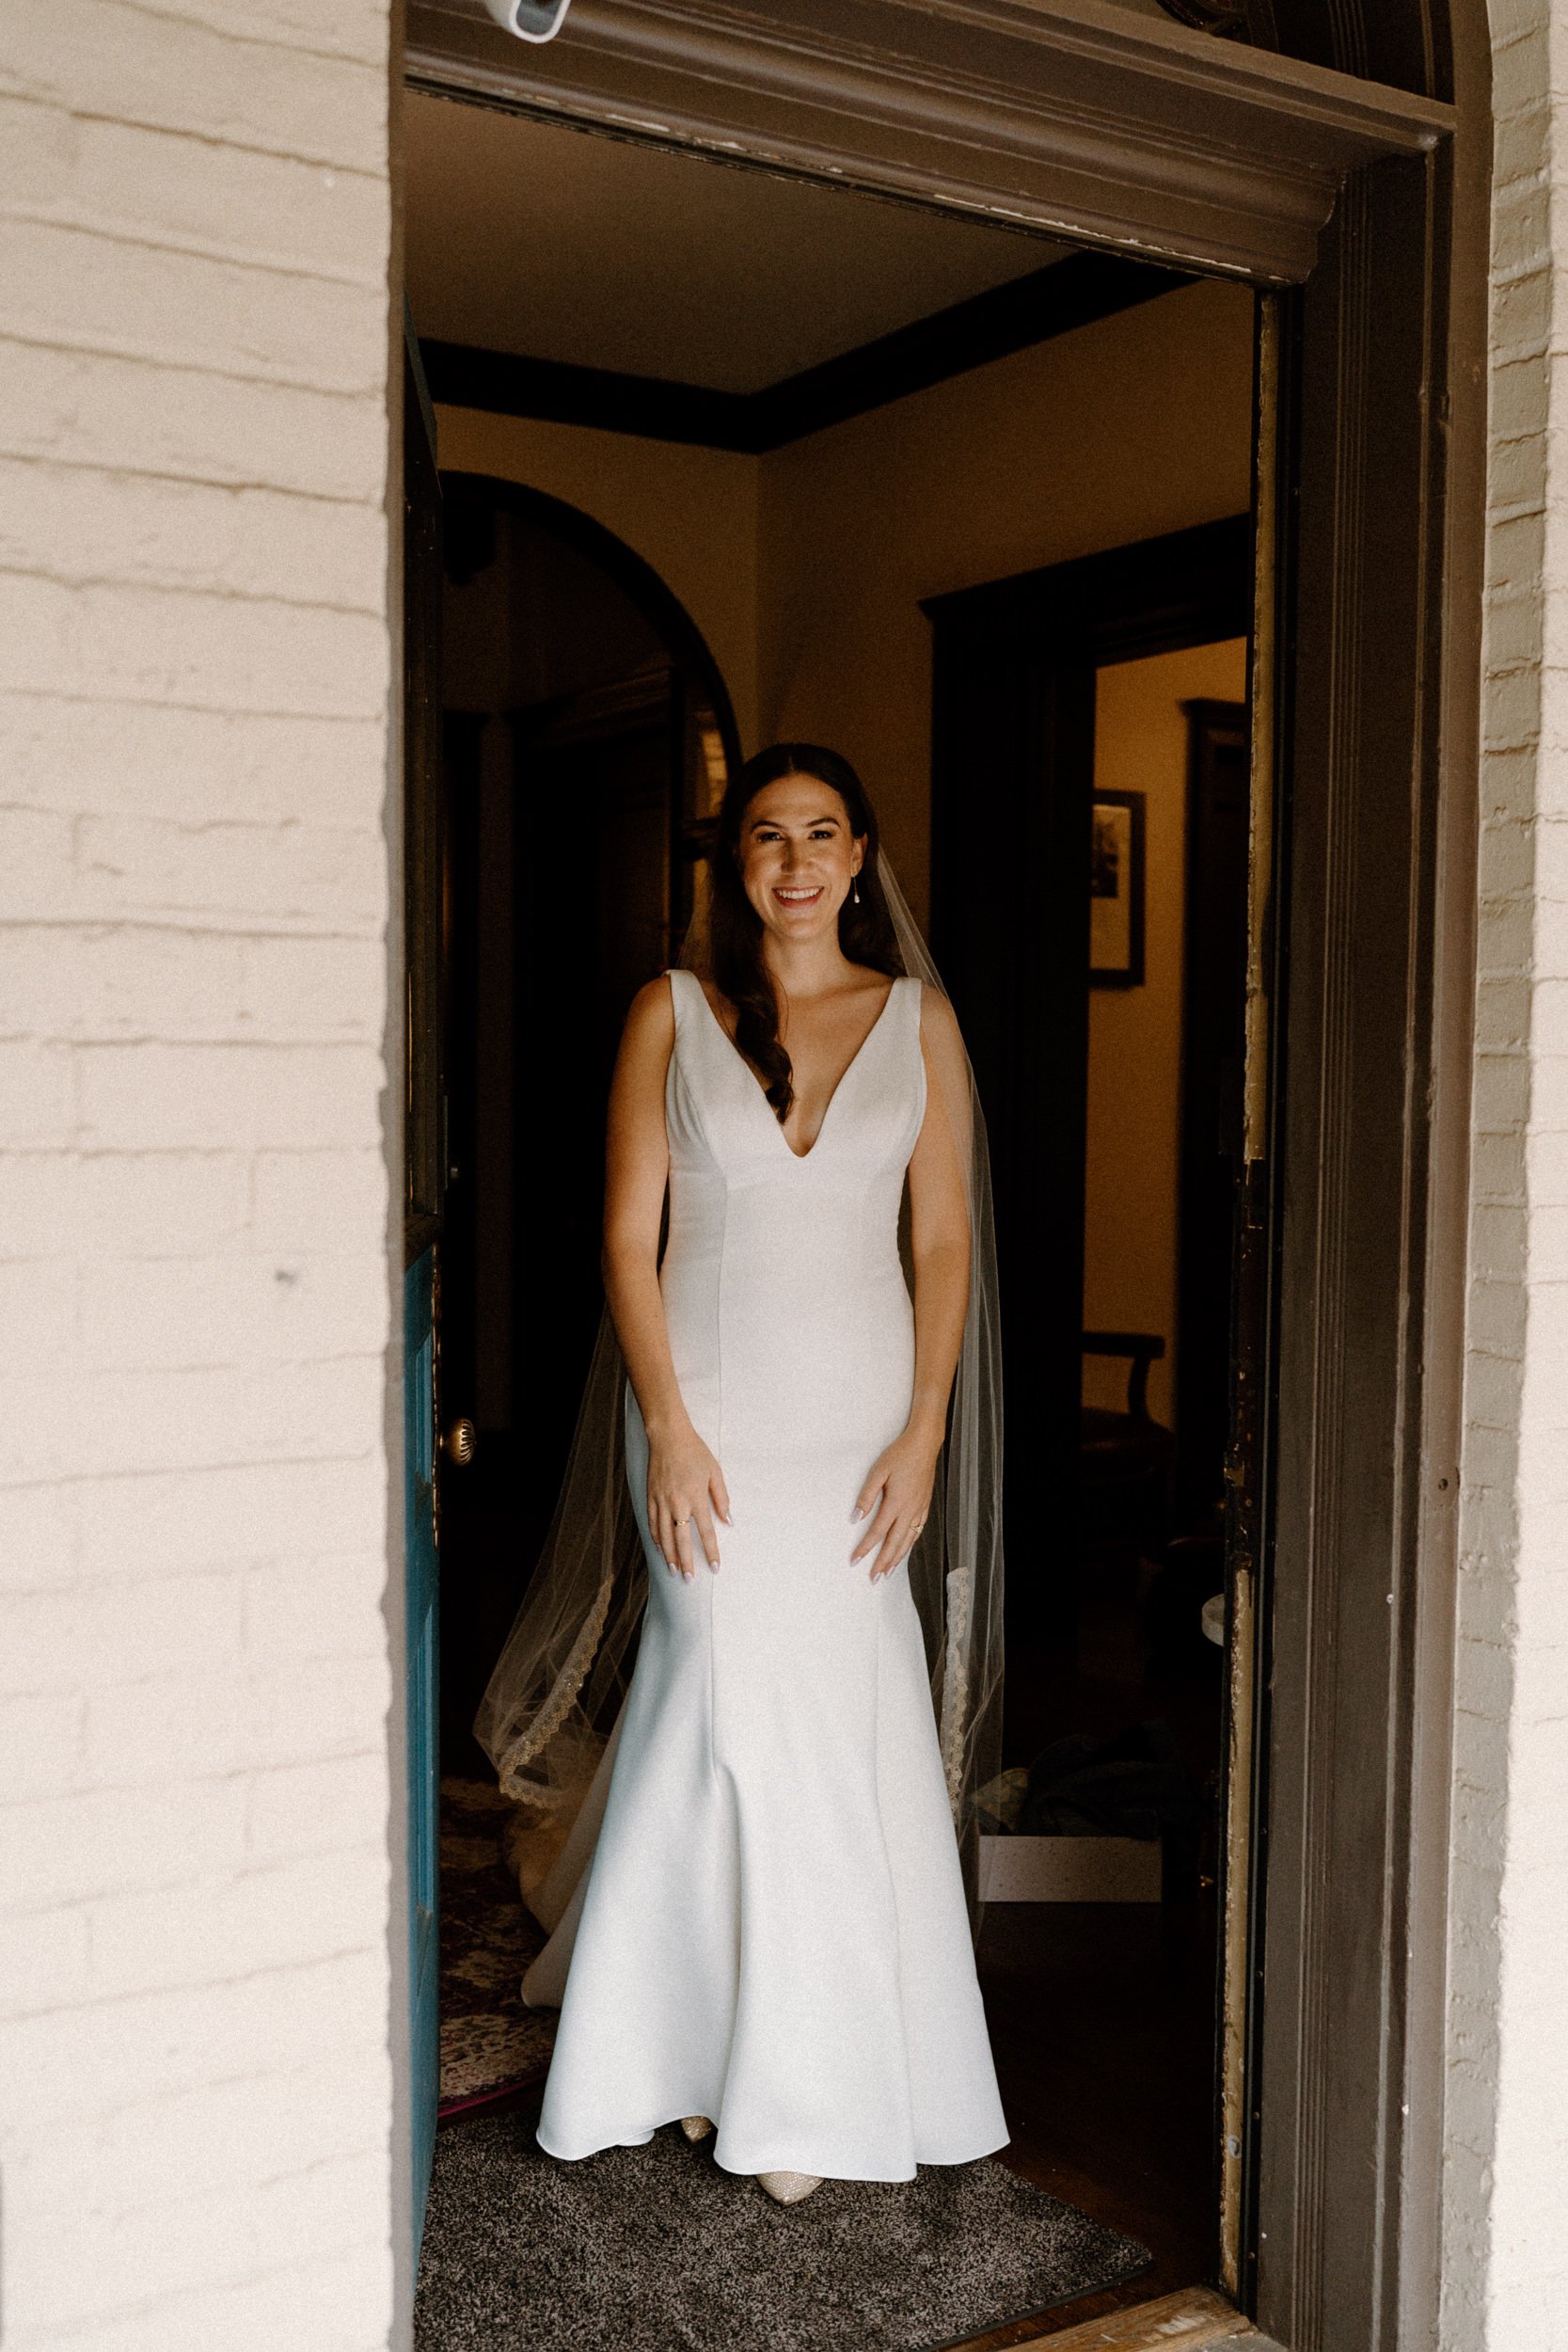 The bride walks out to her waiting bridal party